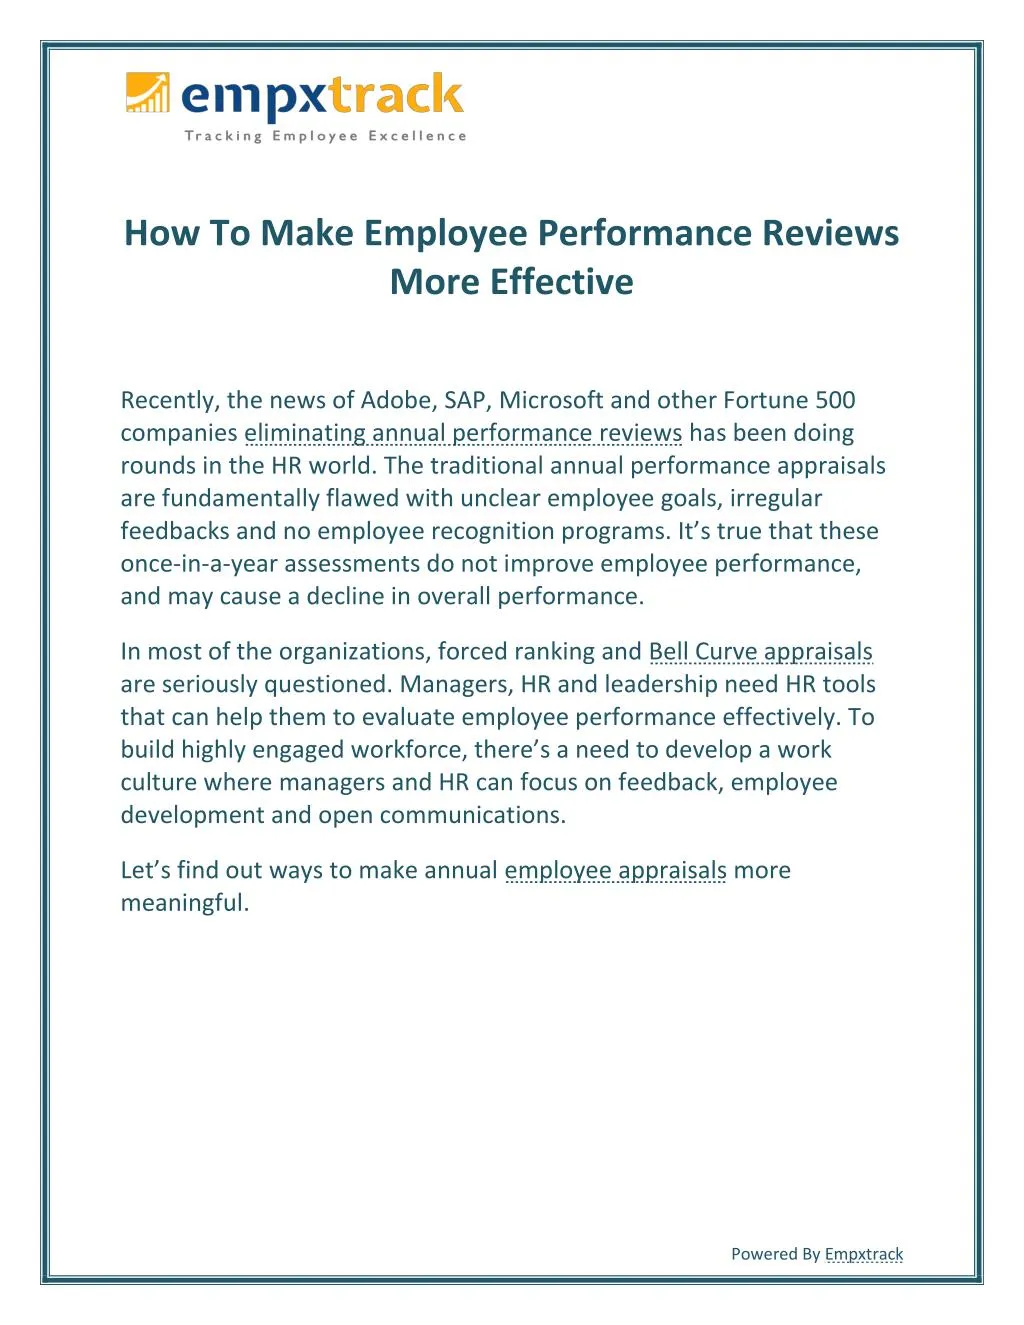 how to make employee performance reviews more